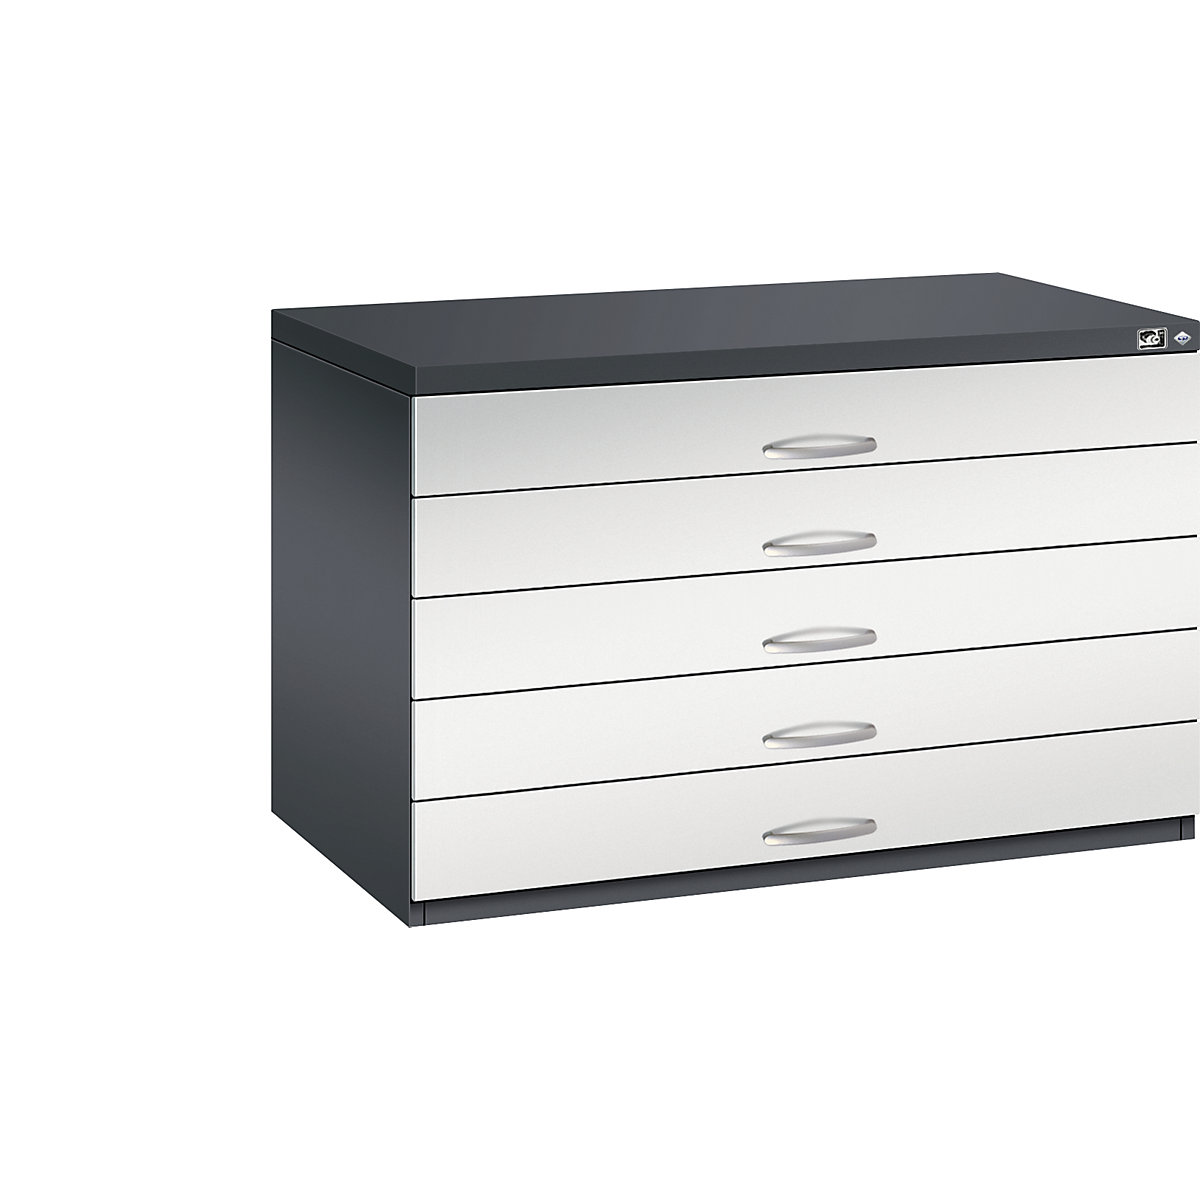 Drawing cabinet – C+P, A1, 5 drawers, height 760 mm, black grey / light grey-21